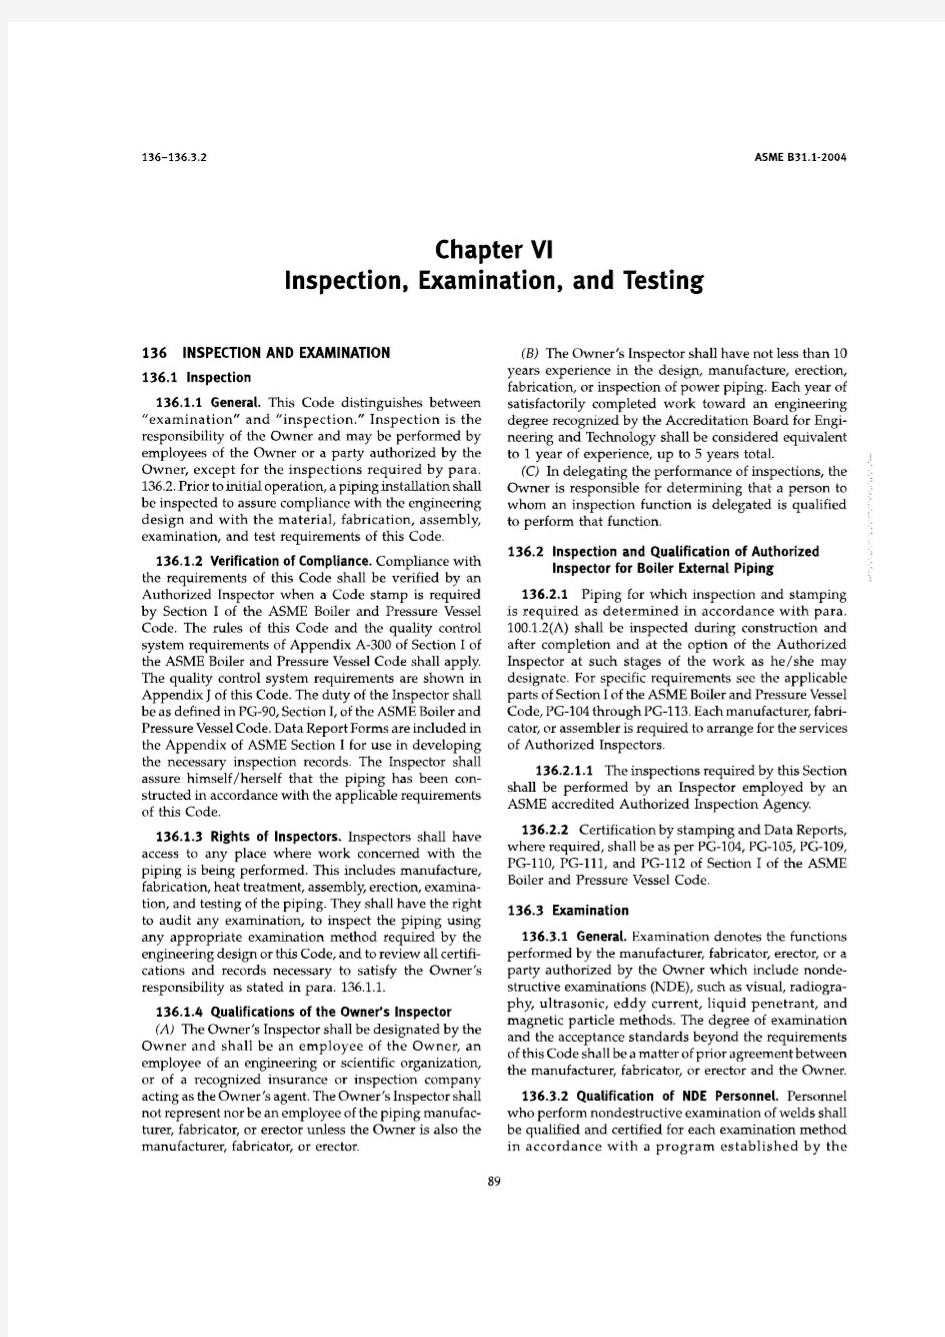 ASME B31.1-2004 Power Piping Chapter VI Inspection Examination and Testing